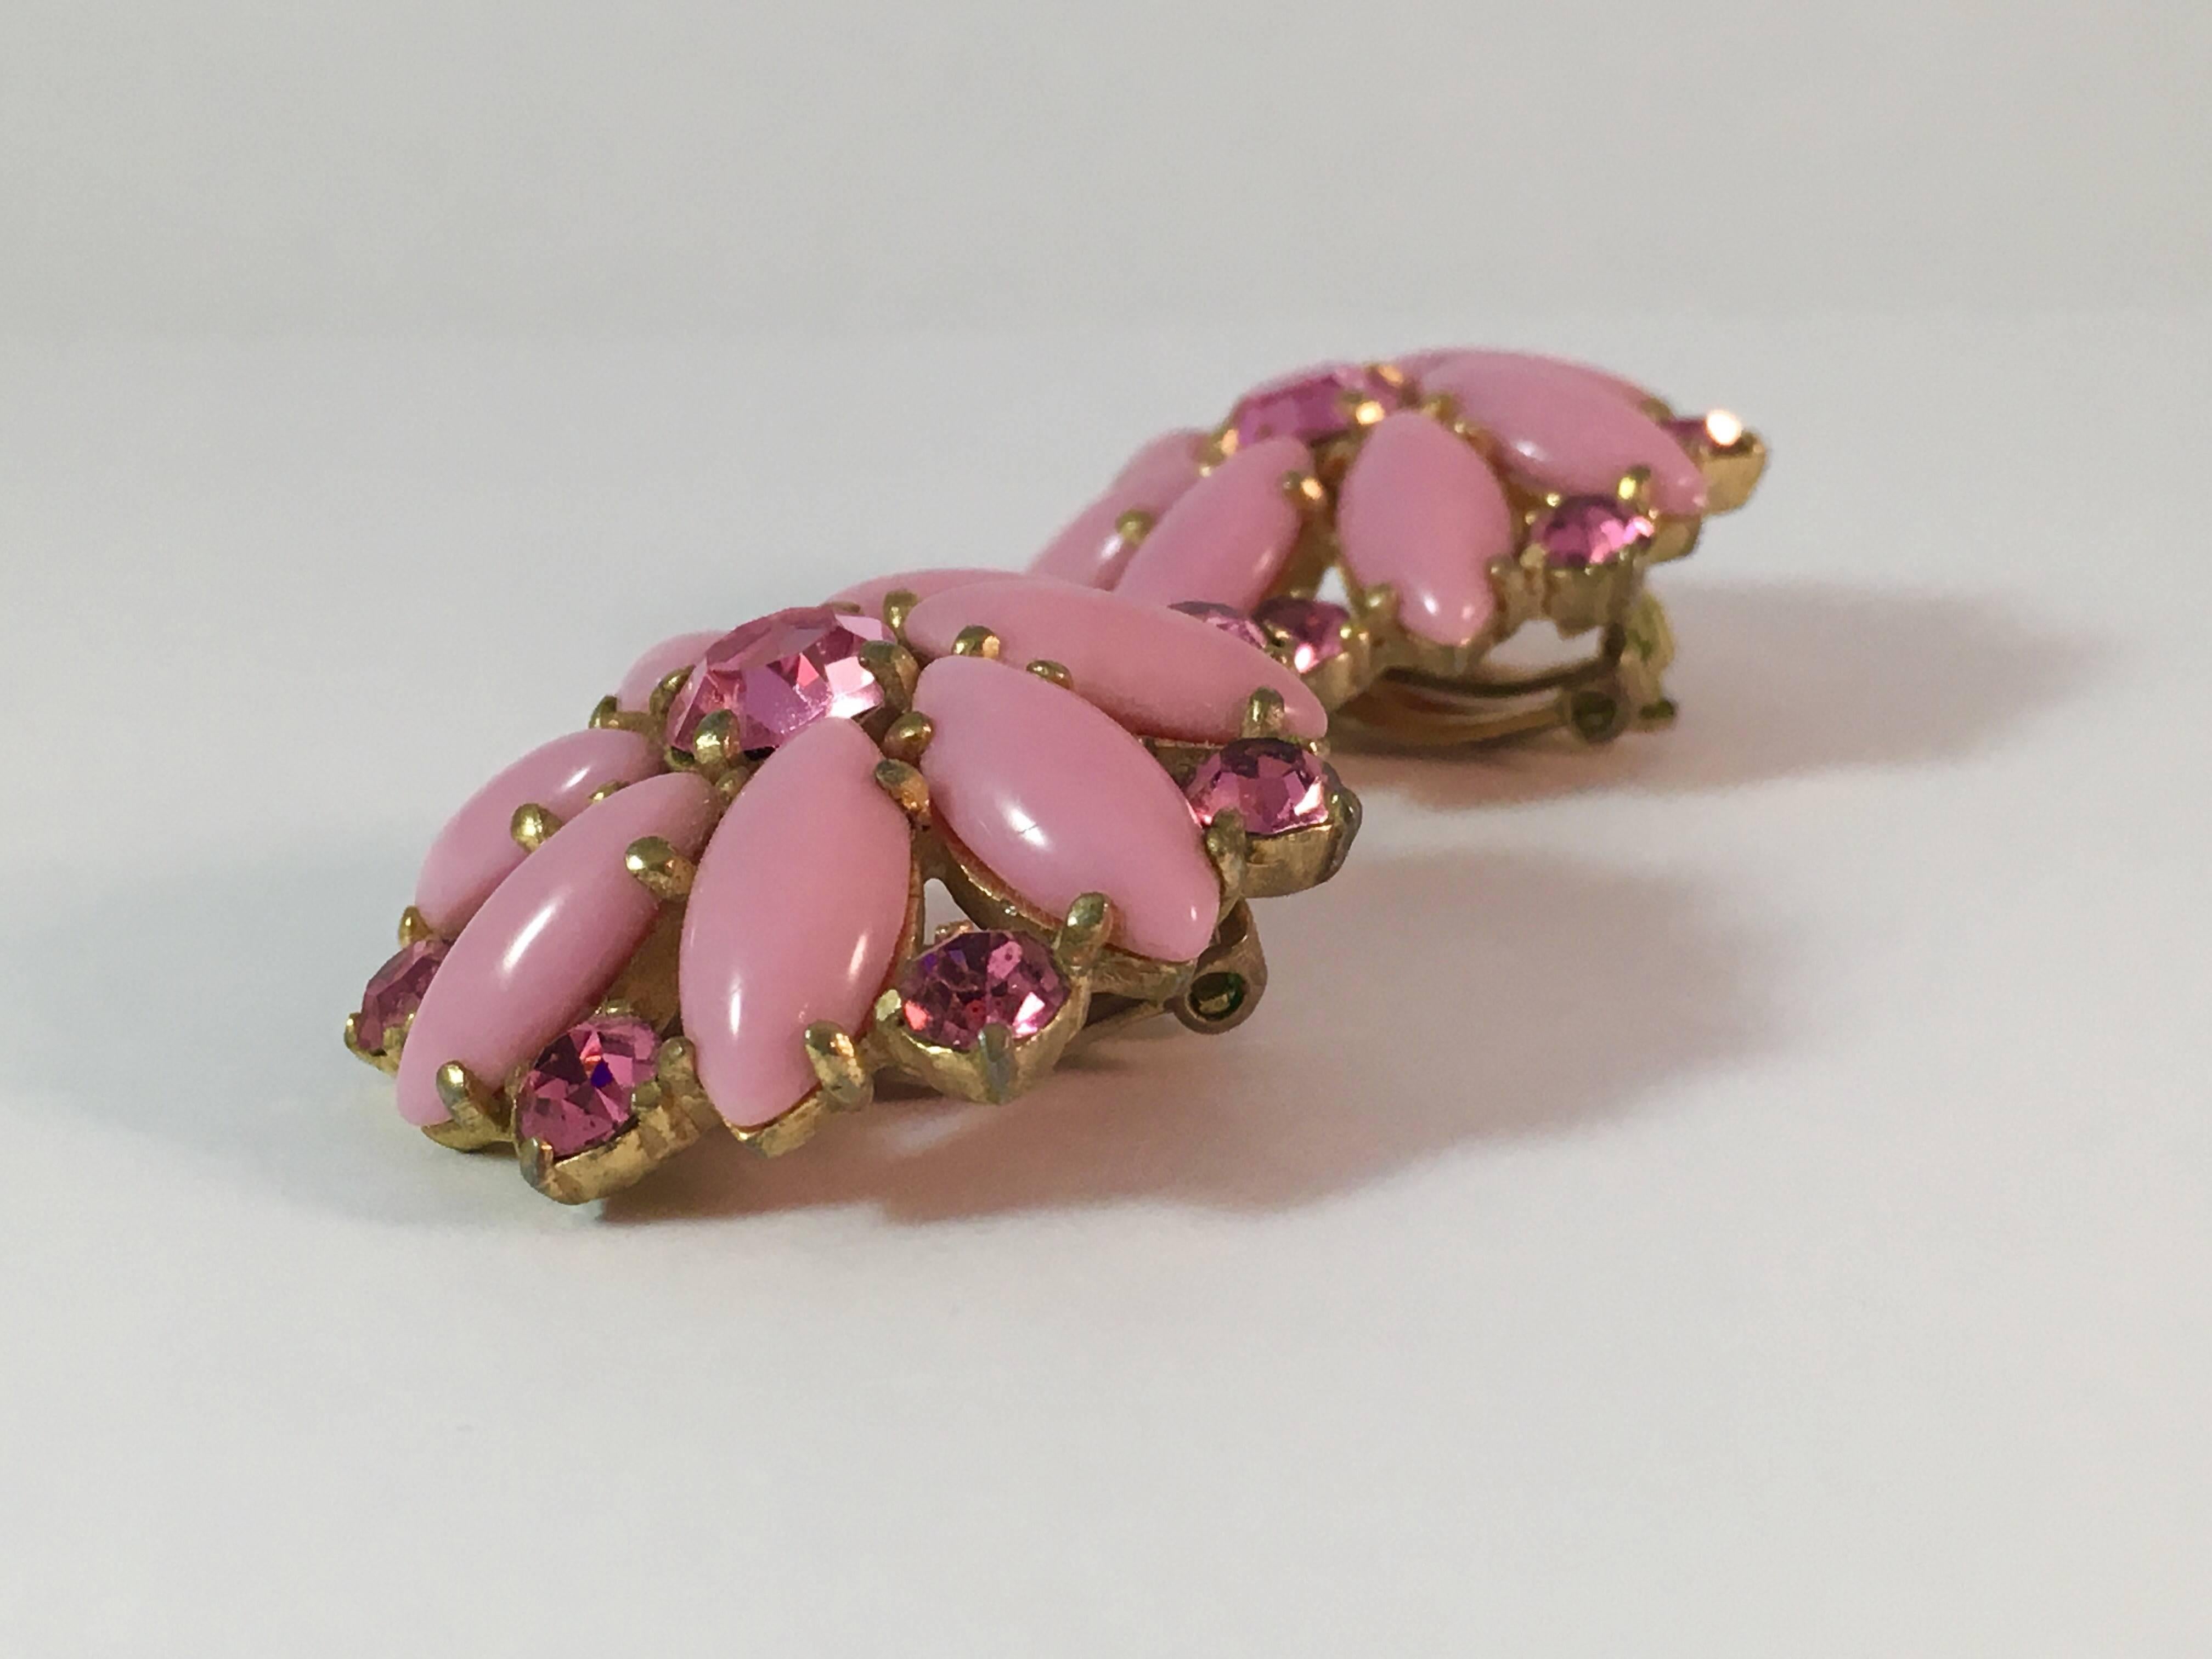 This is an amazing pair of pink flower Elsa Schiaparelli clip-on earrings. They are beautifully made out of pink opaque glass stones and pink crystal stones. They measure 1 1/4 inches in diameter and are in excellent condition. They are marked